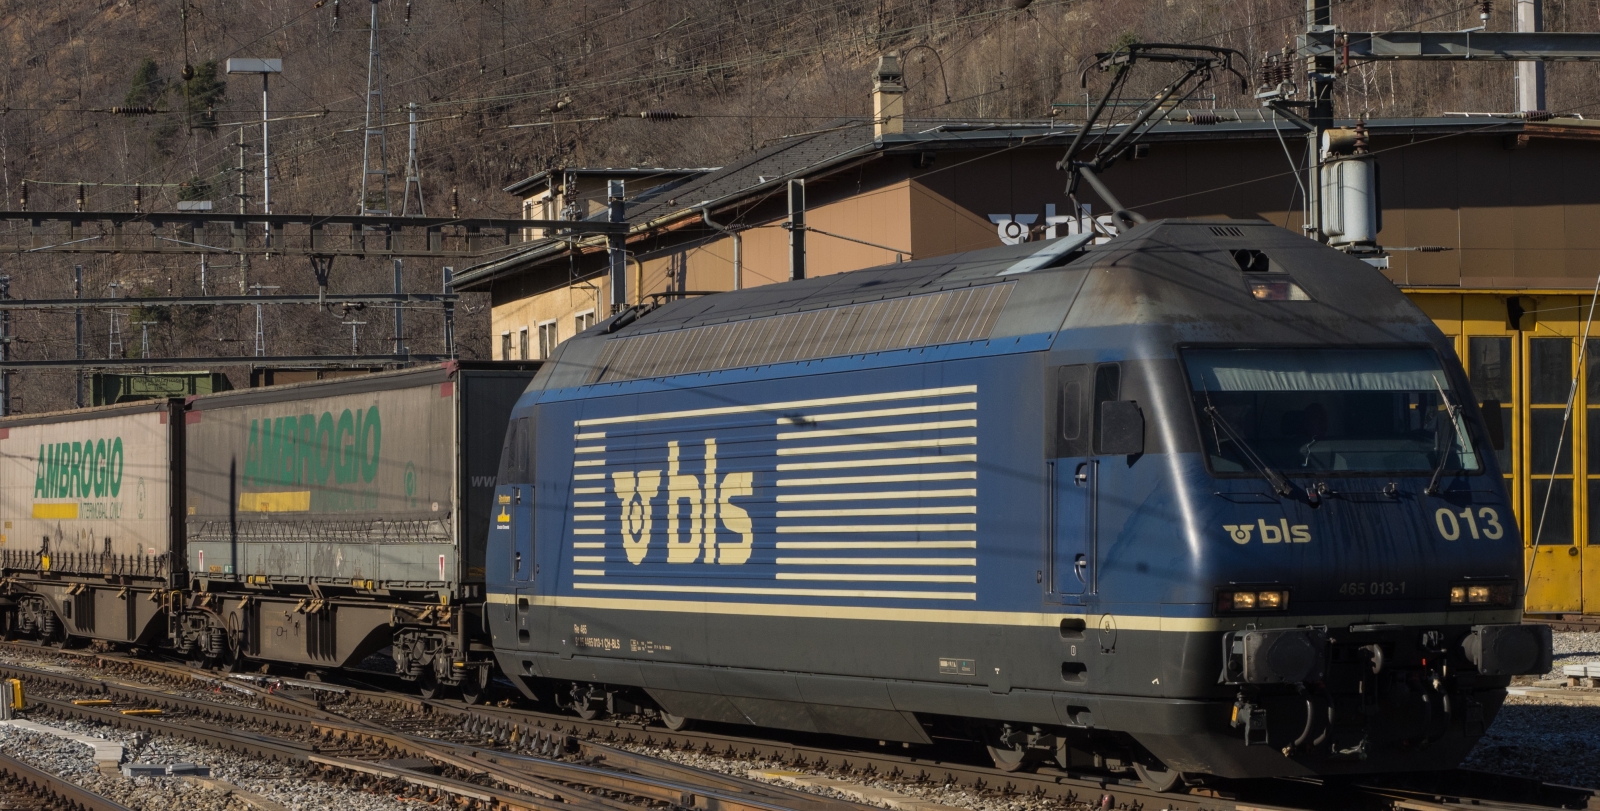 Re 465 013 with a freight train in February 2016 in Brig